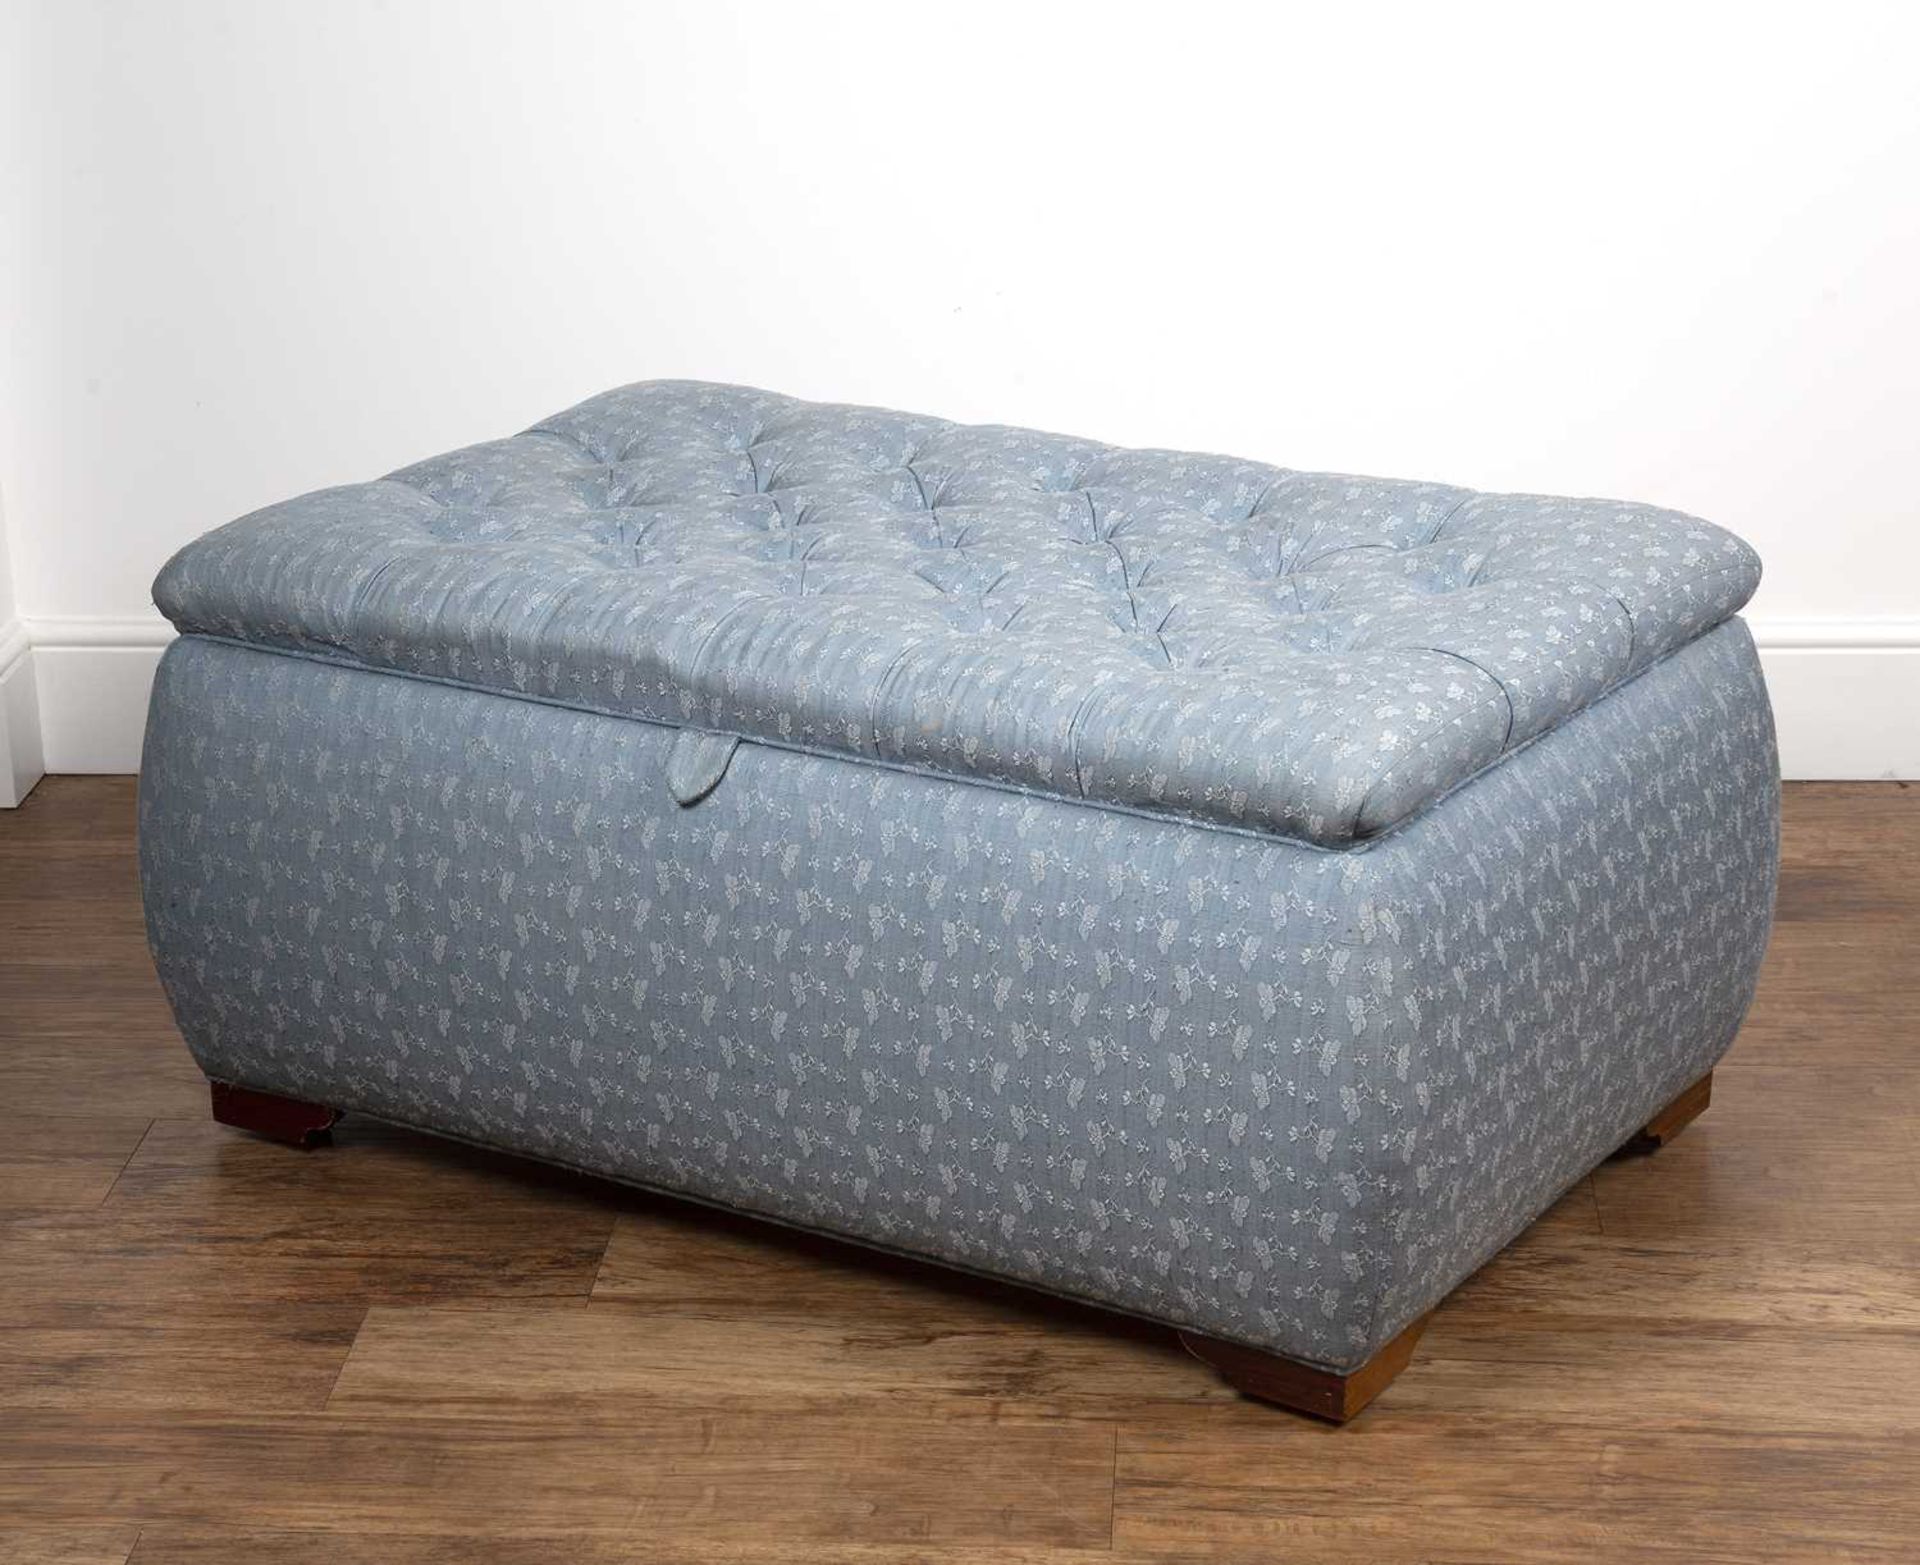 Large contemporary blue button upholstered ottoman with a lift up cover, 110cm wide x 72cm deep x - Image 2 of 5